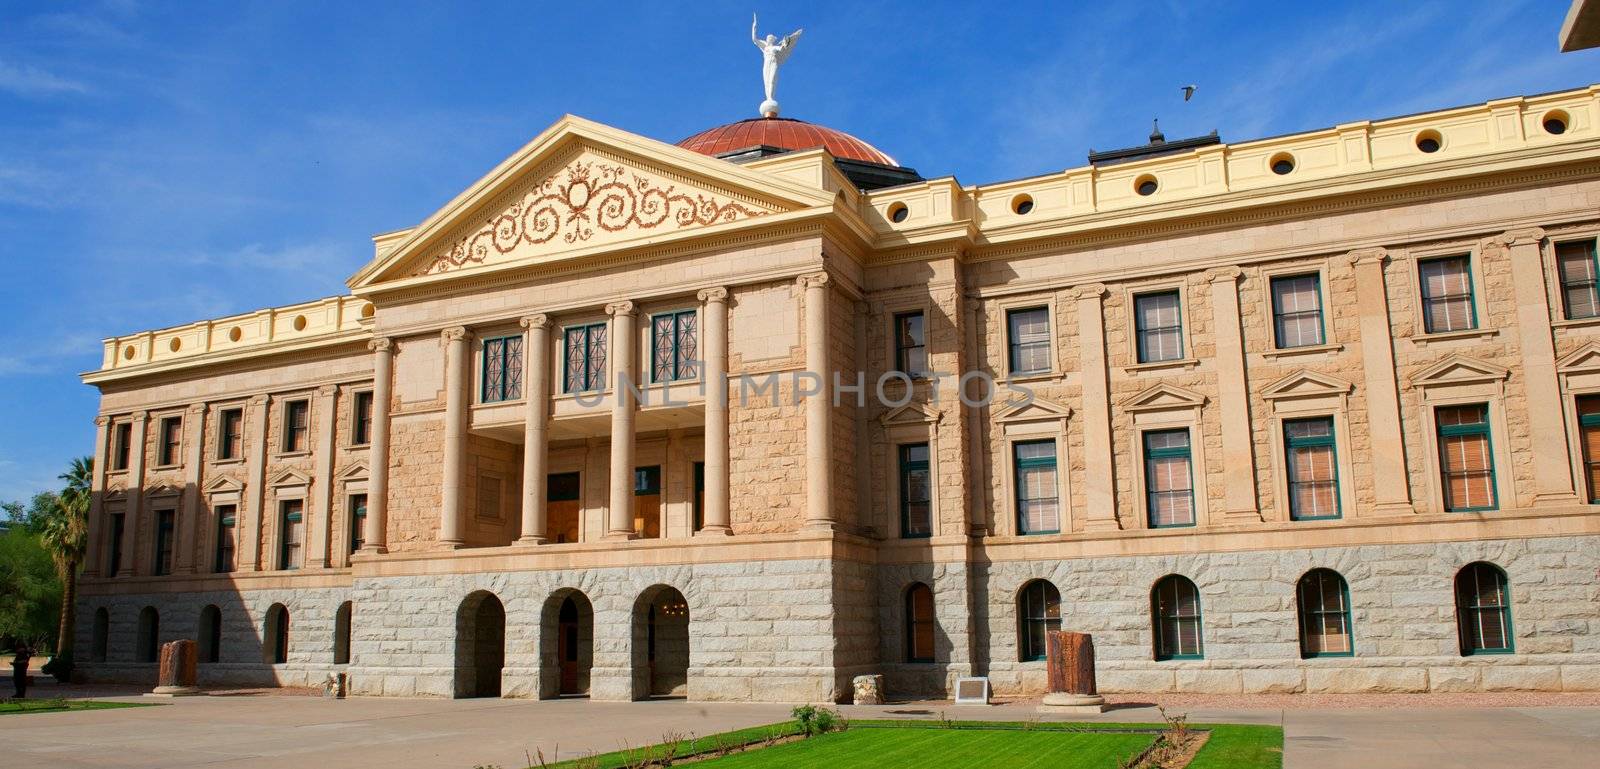 Arizona State Capital with windows, pillars, bright blue sky and green grass by pixelsnap